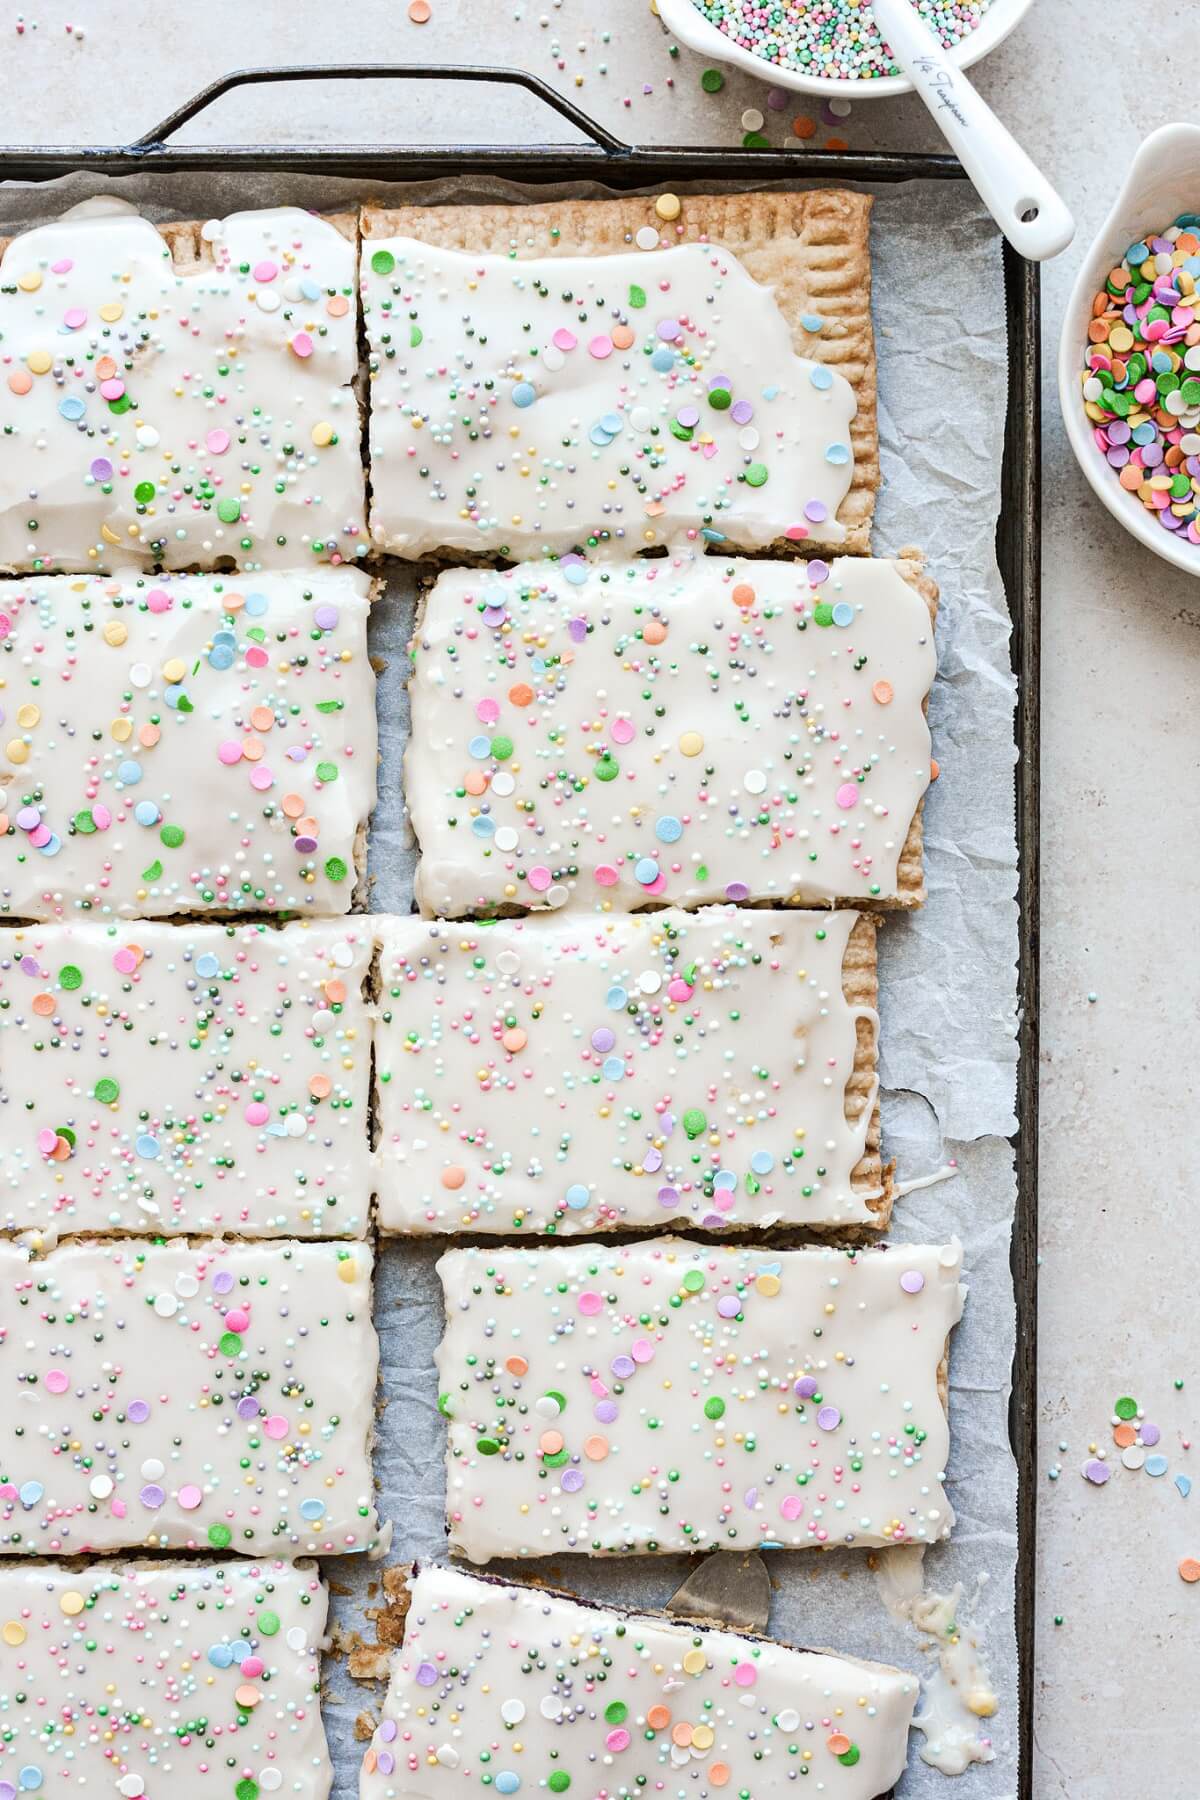 Blueberry pop tarts with vanilla icing and sprinkles.